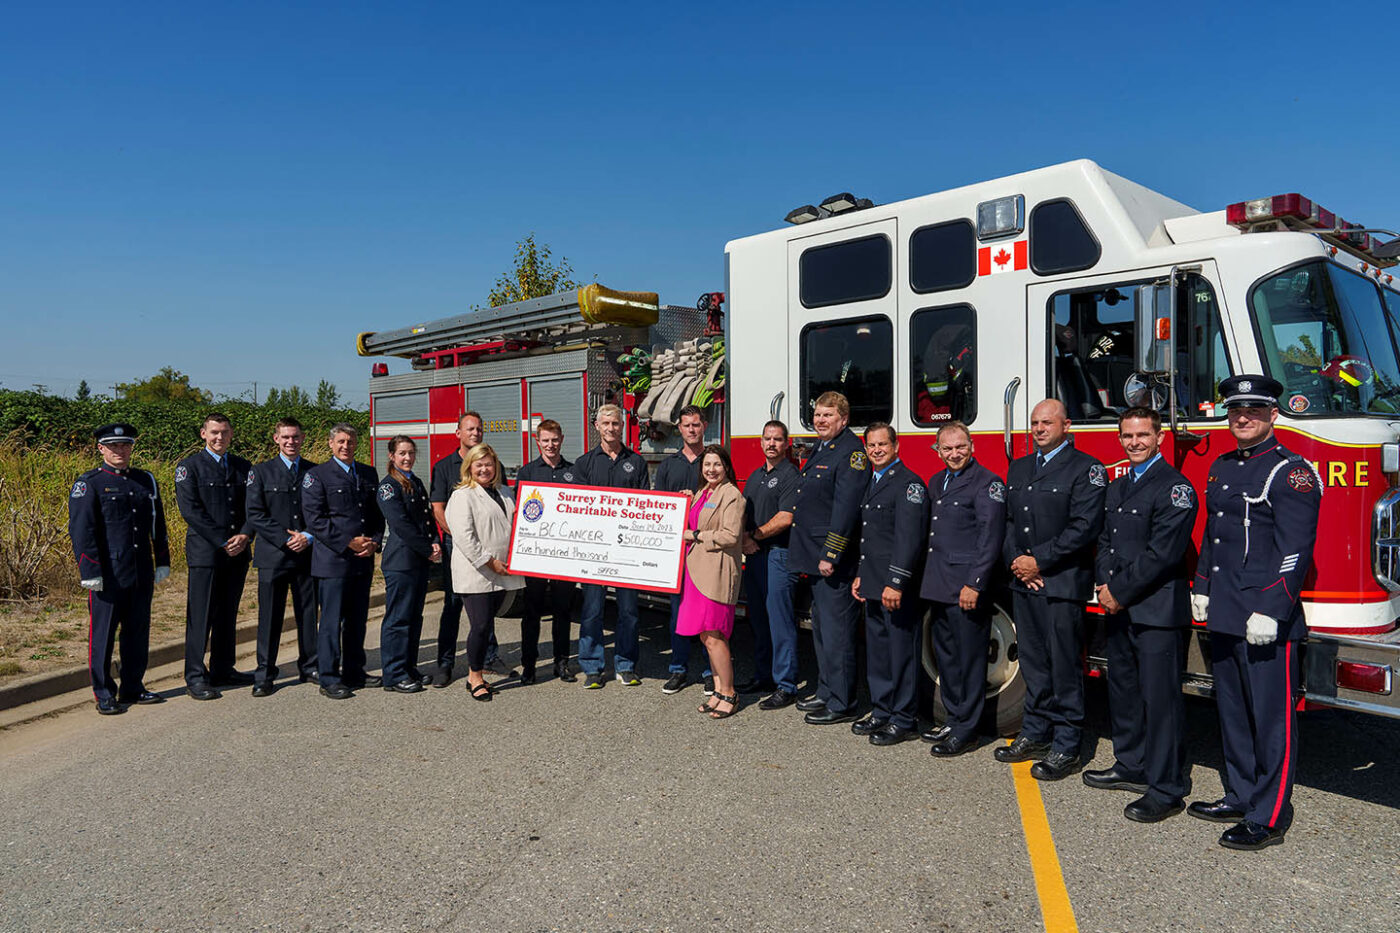 Surrey Fire Fighters Charitable Society